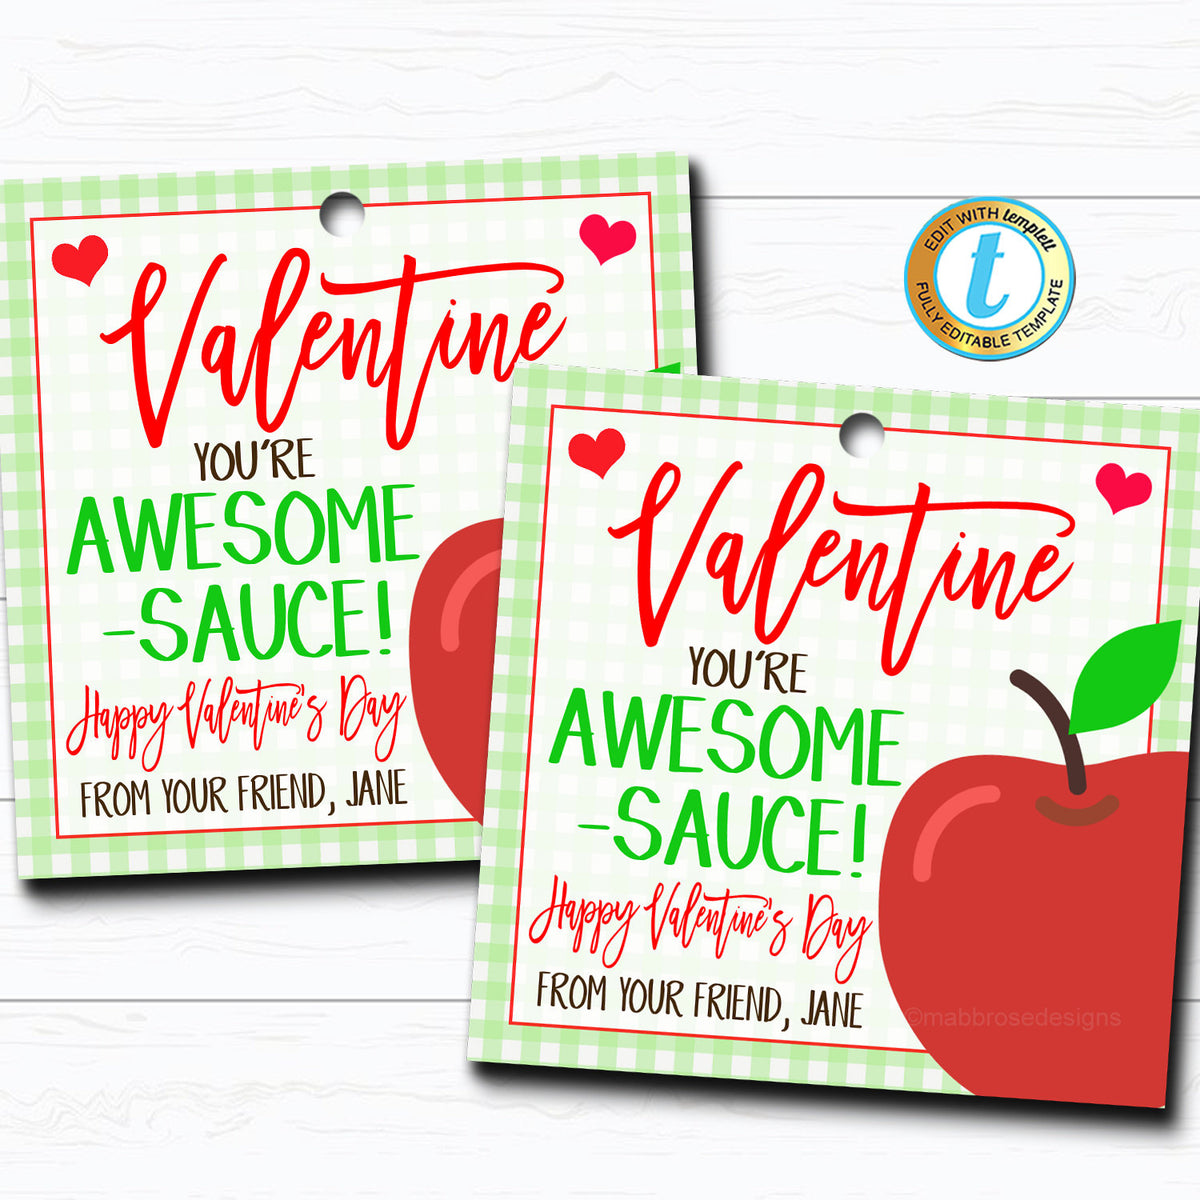 valentine-applesauce-tag-you-re-awesome-sauce-printable-tidylady-printables